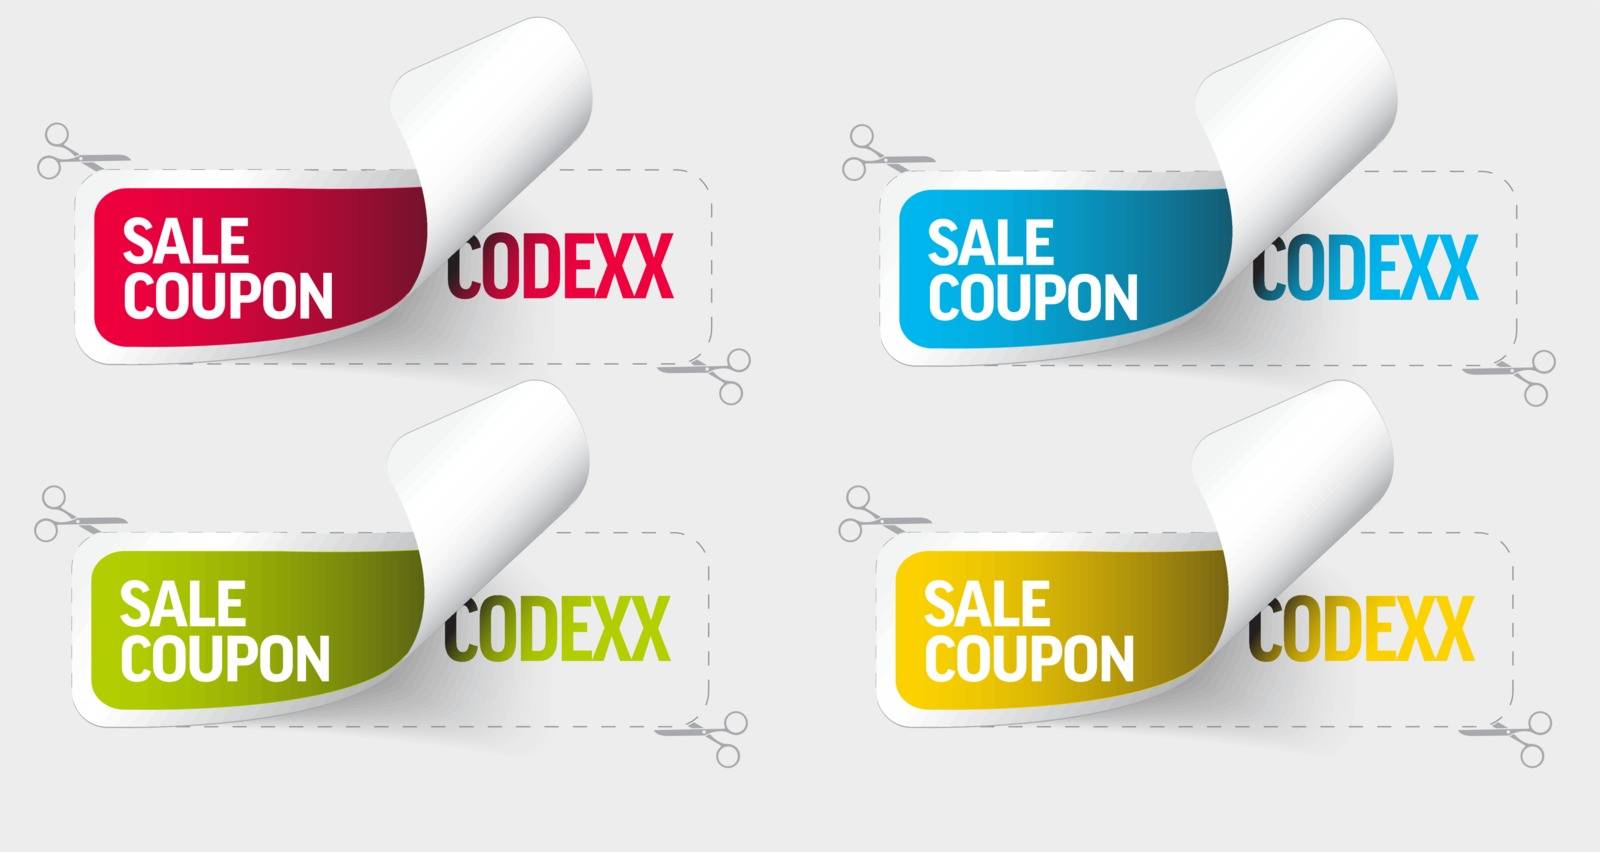 Set of sticker templates displaying the sale coupon code numbers - red, blue, green and yellow version